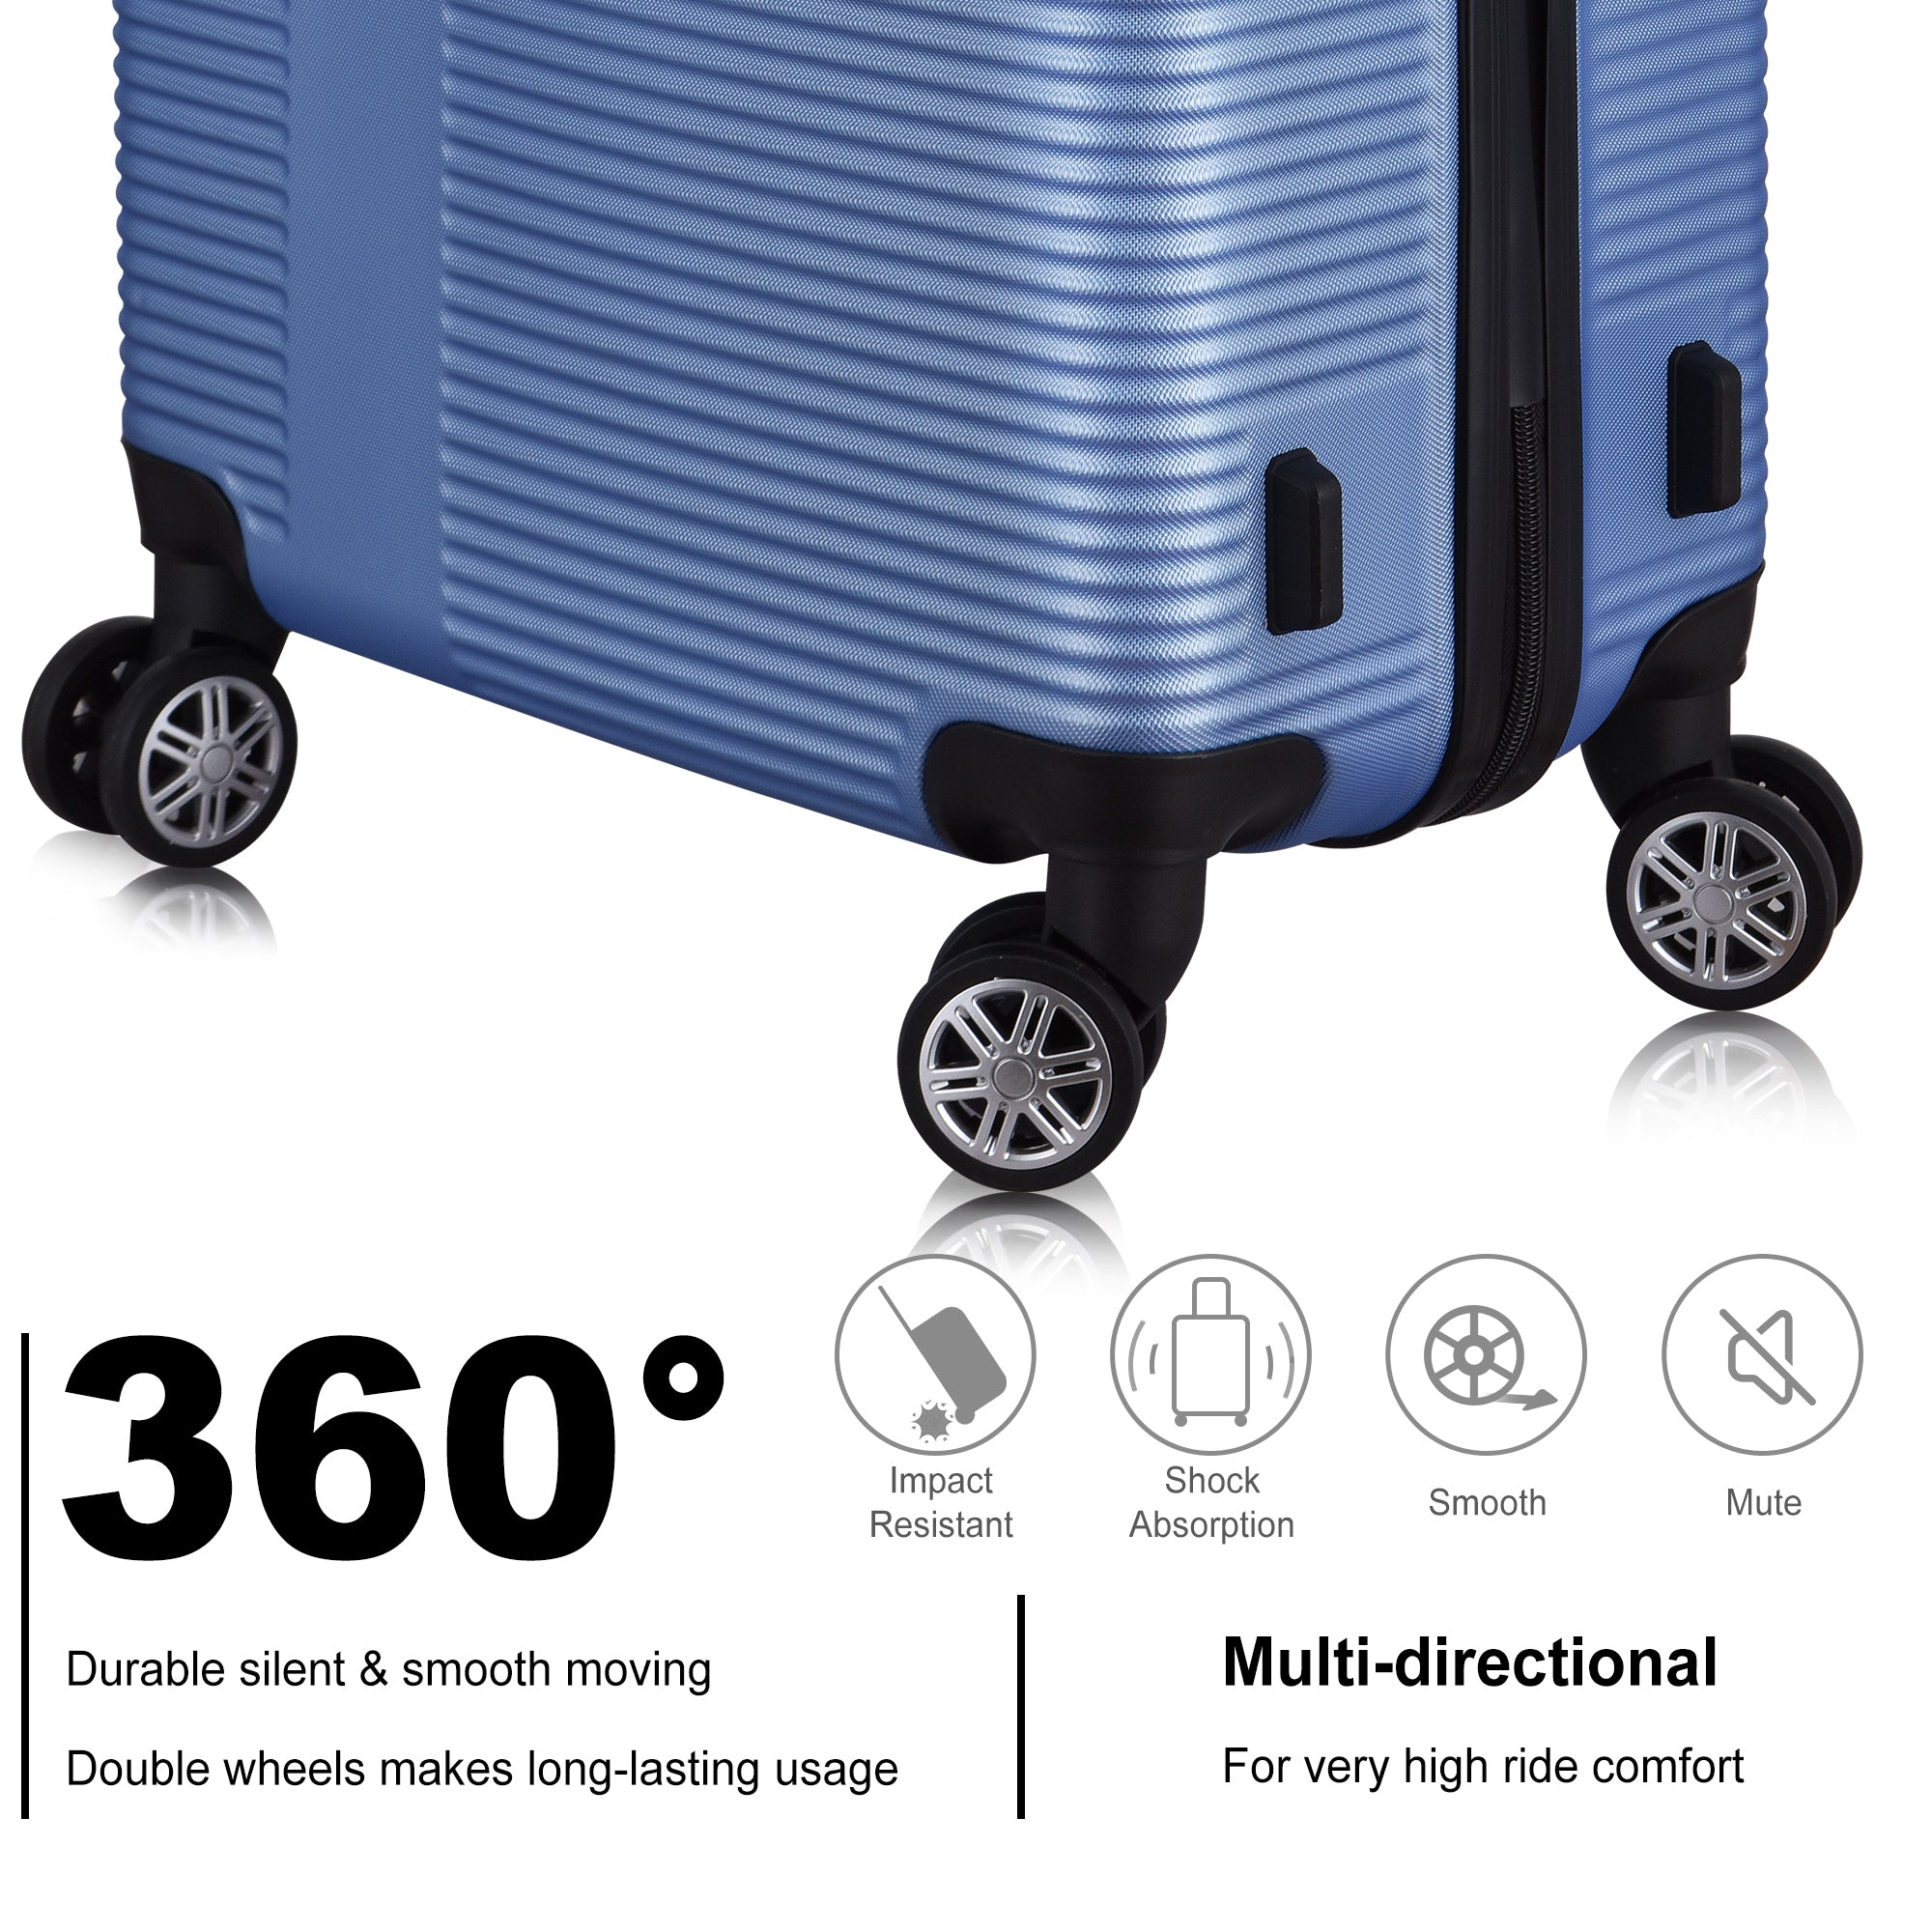 3 Piece Luggage with TSA Lock ABS, Durable Luggage light blue-abs